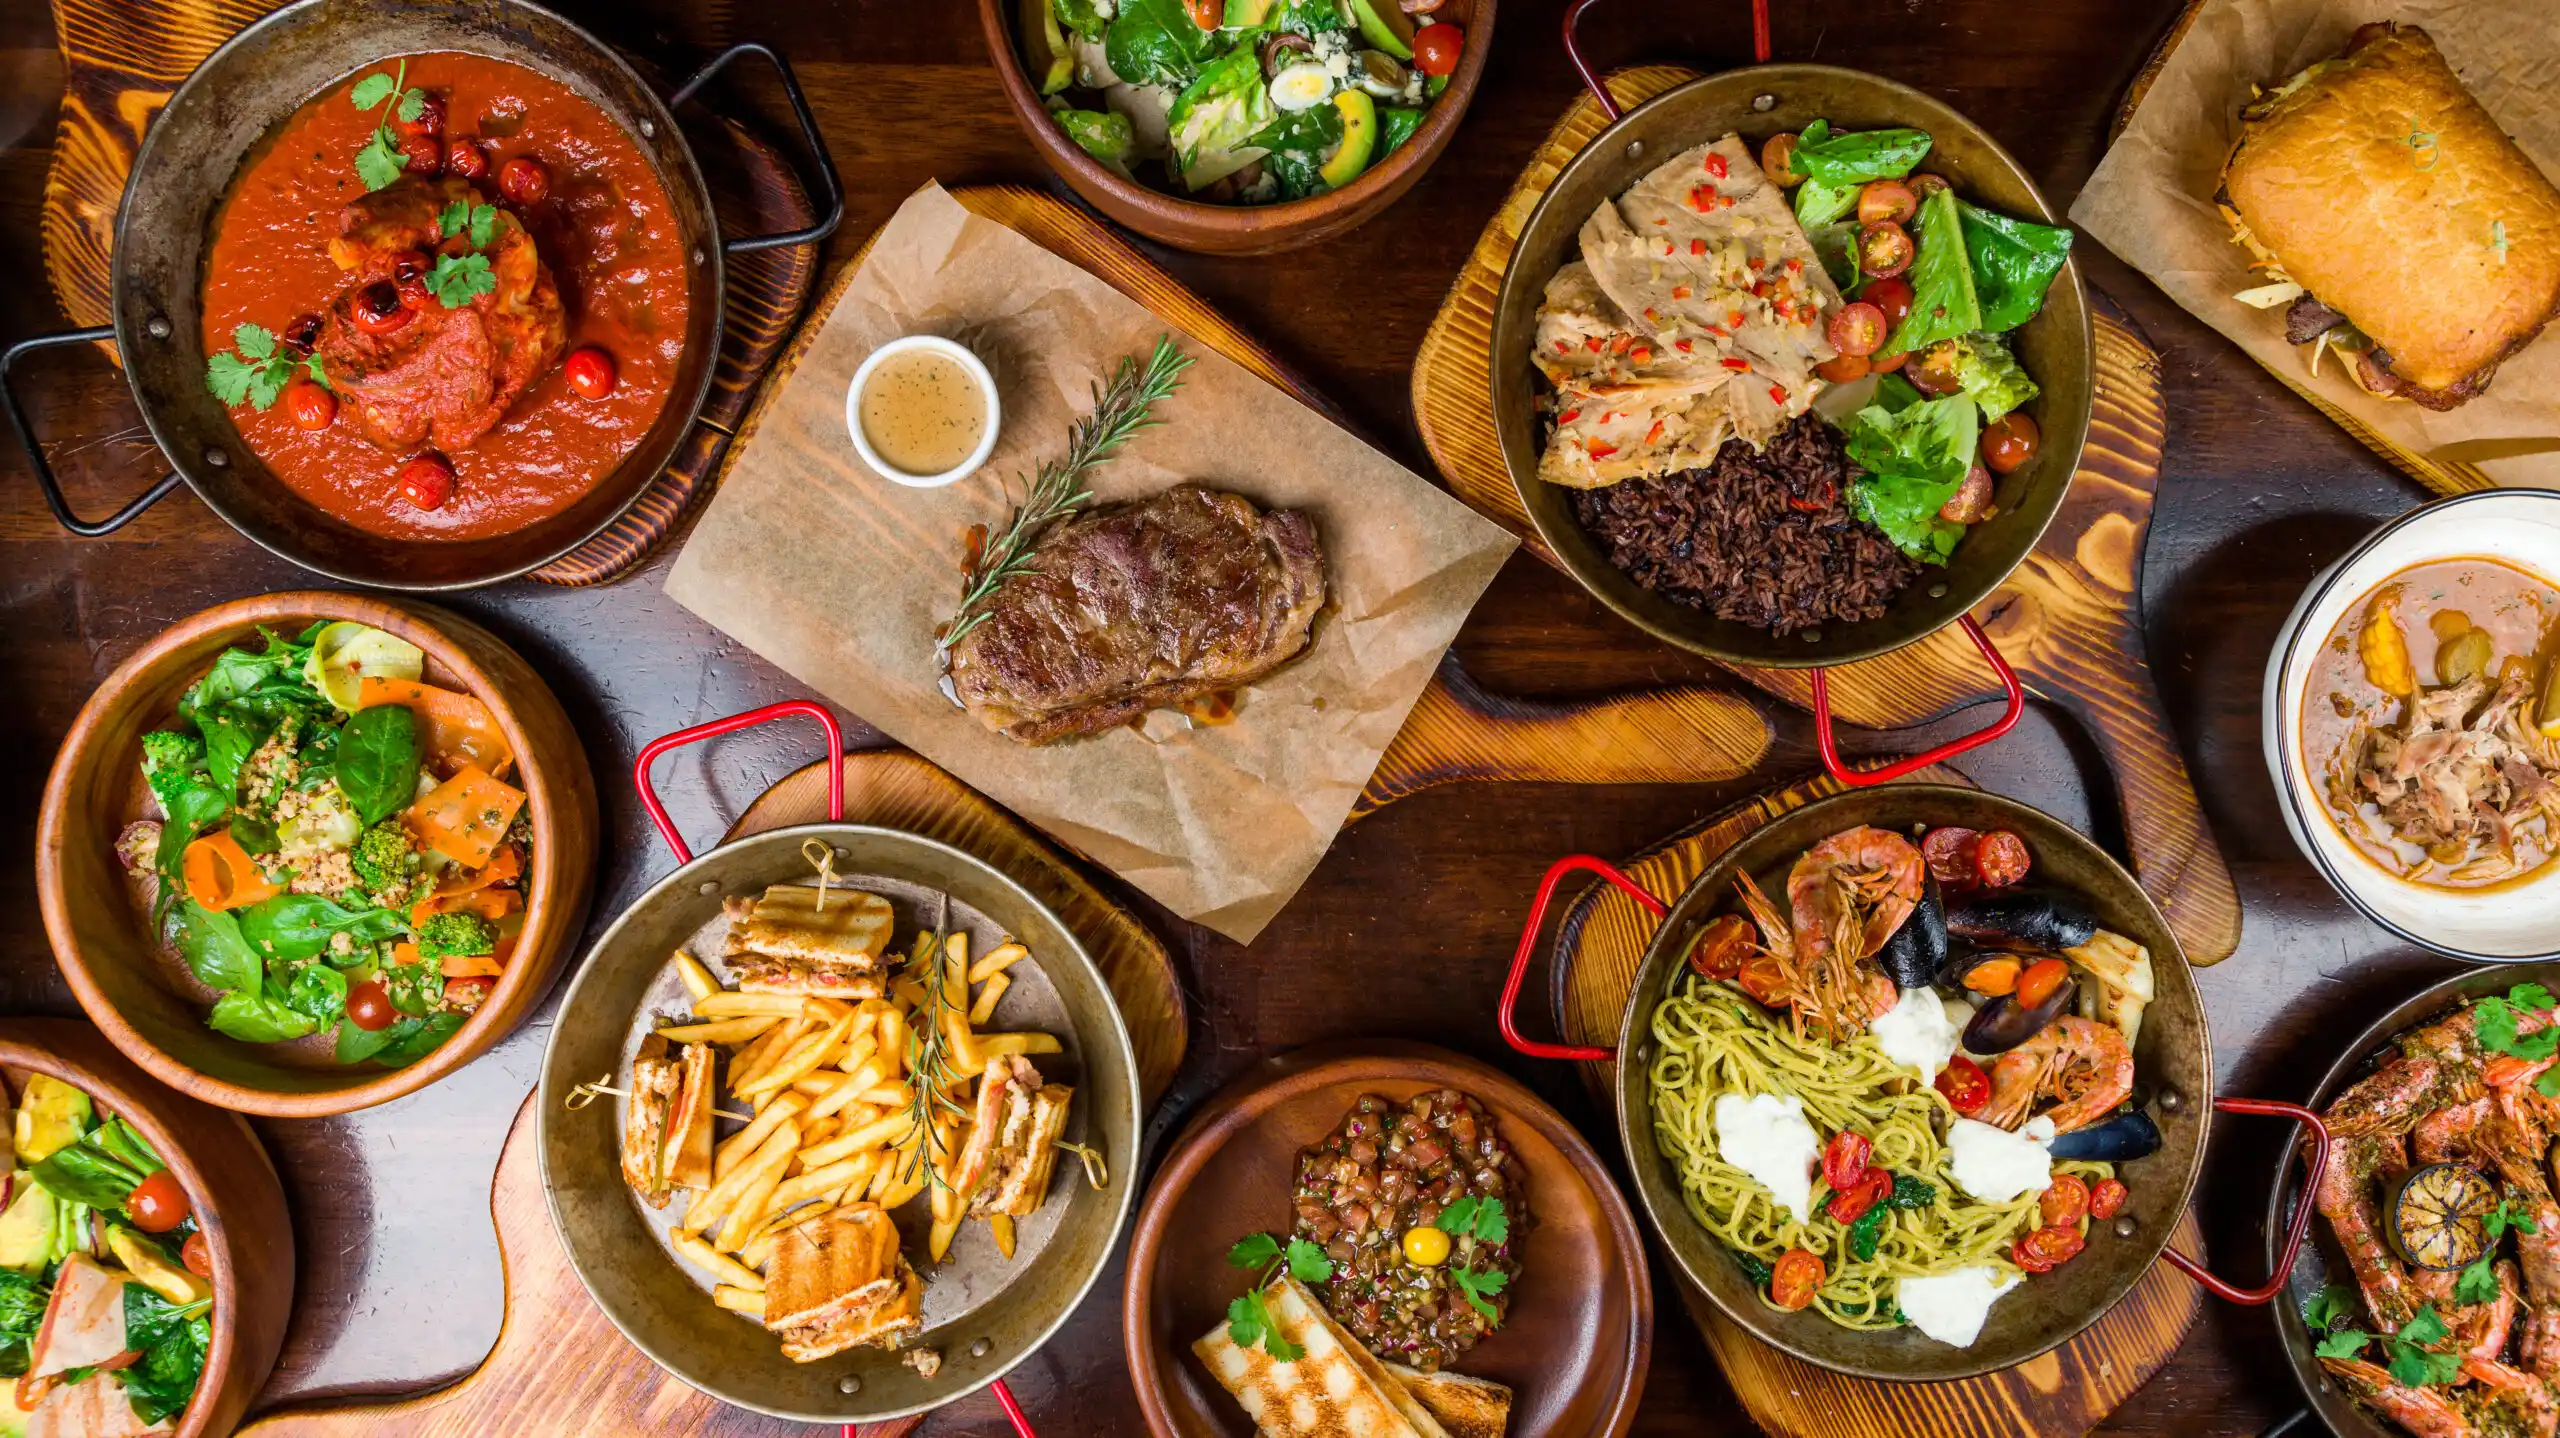 Free Food For March 2021: The Best Restaurant Deals We Found